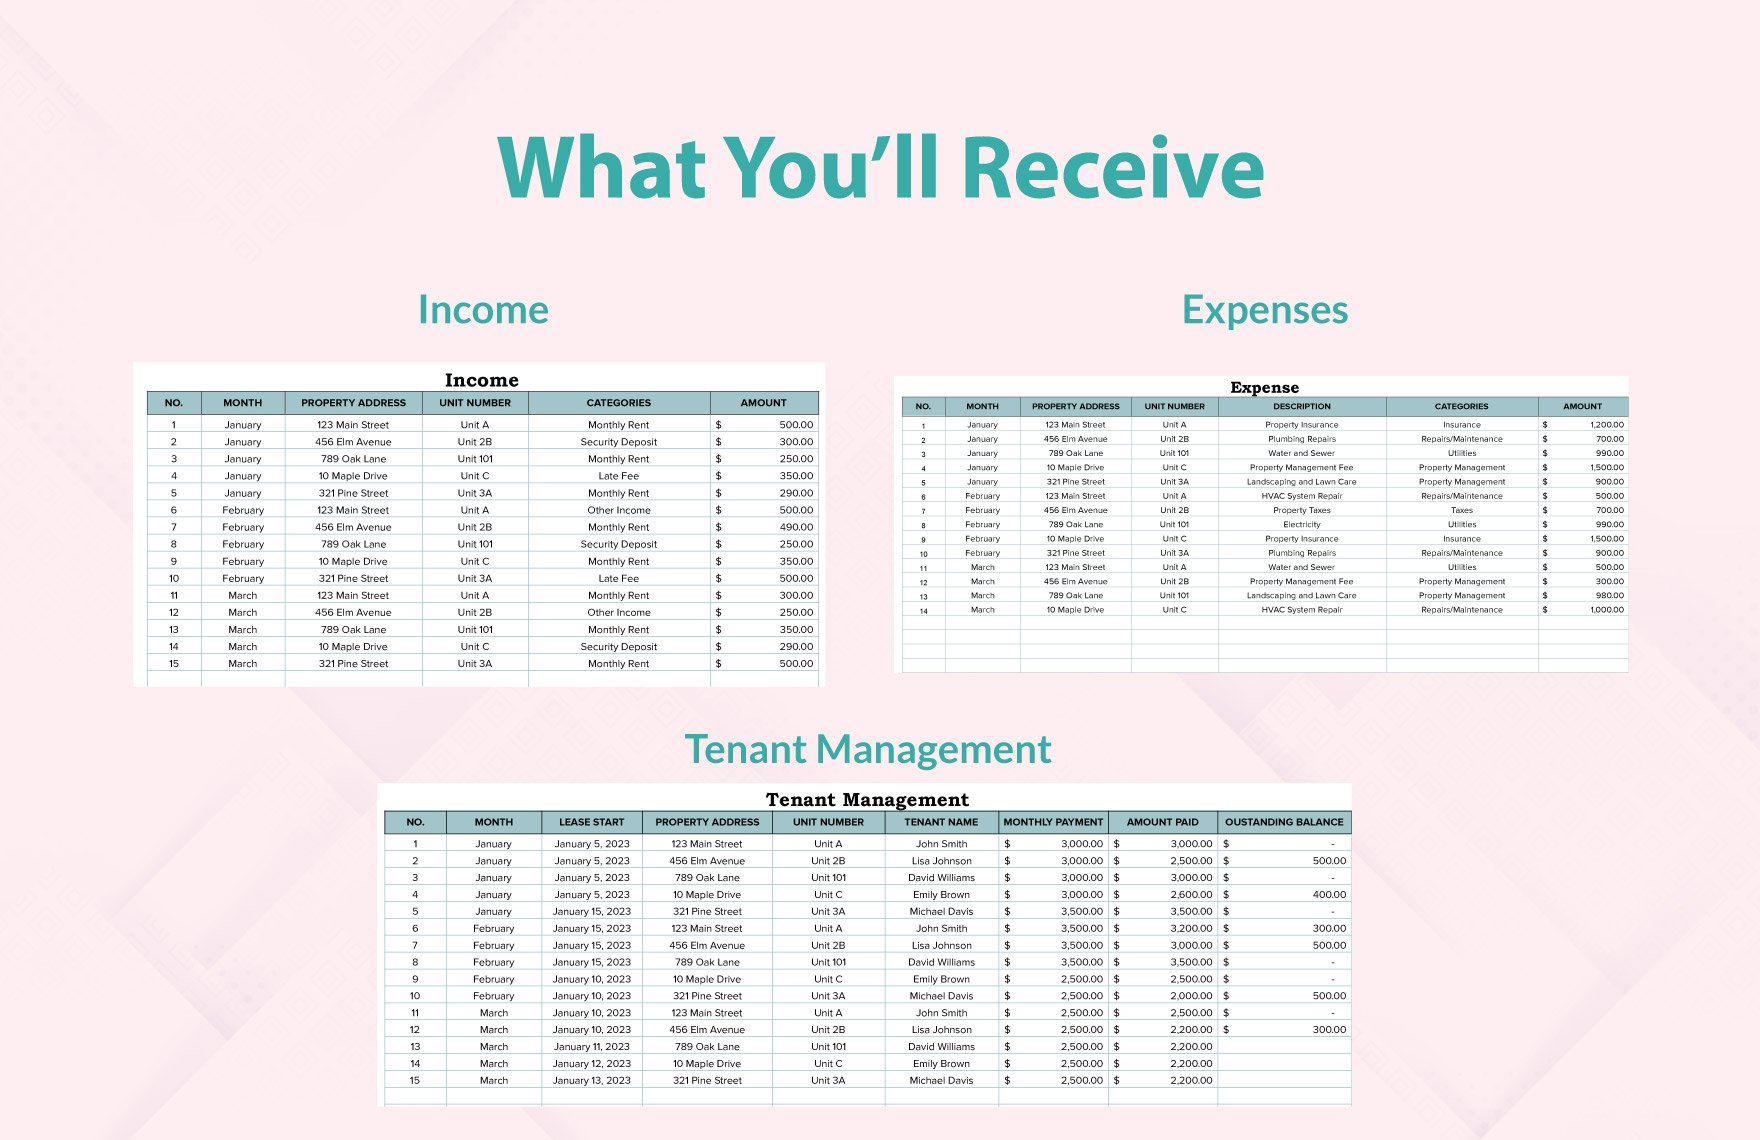 Rental Property Income and Expenses template